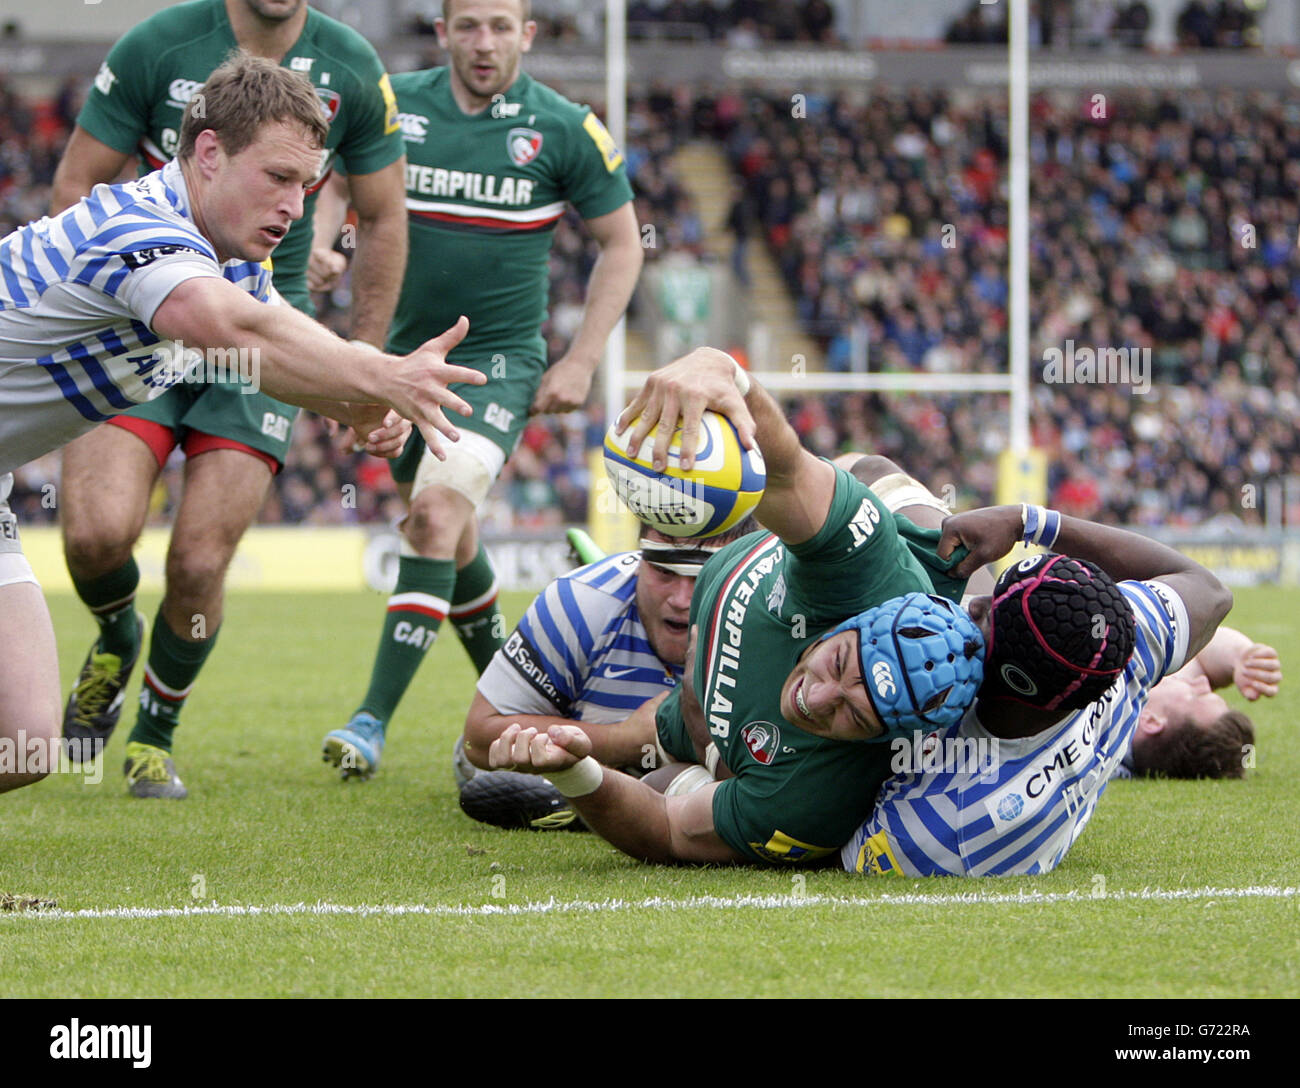 Leicester Tigers' Graham Kitchener dives in to score a try during the Aviva Premiership match at Welford Road, Leicester. Stock Photo